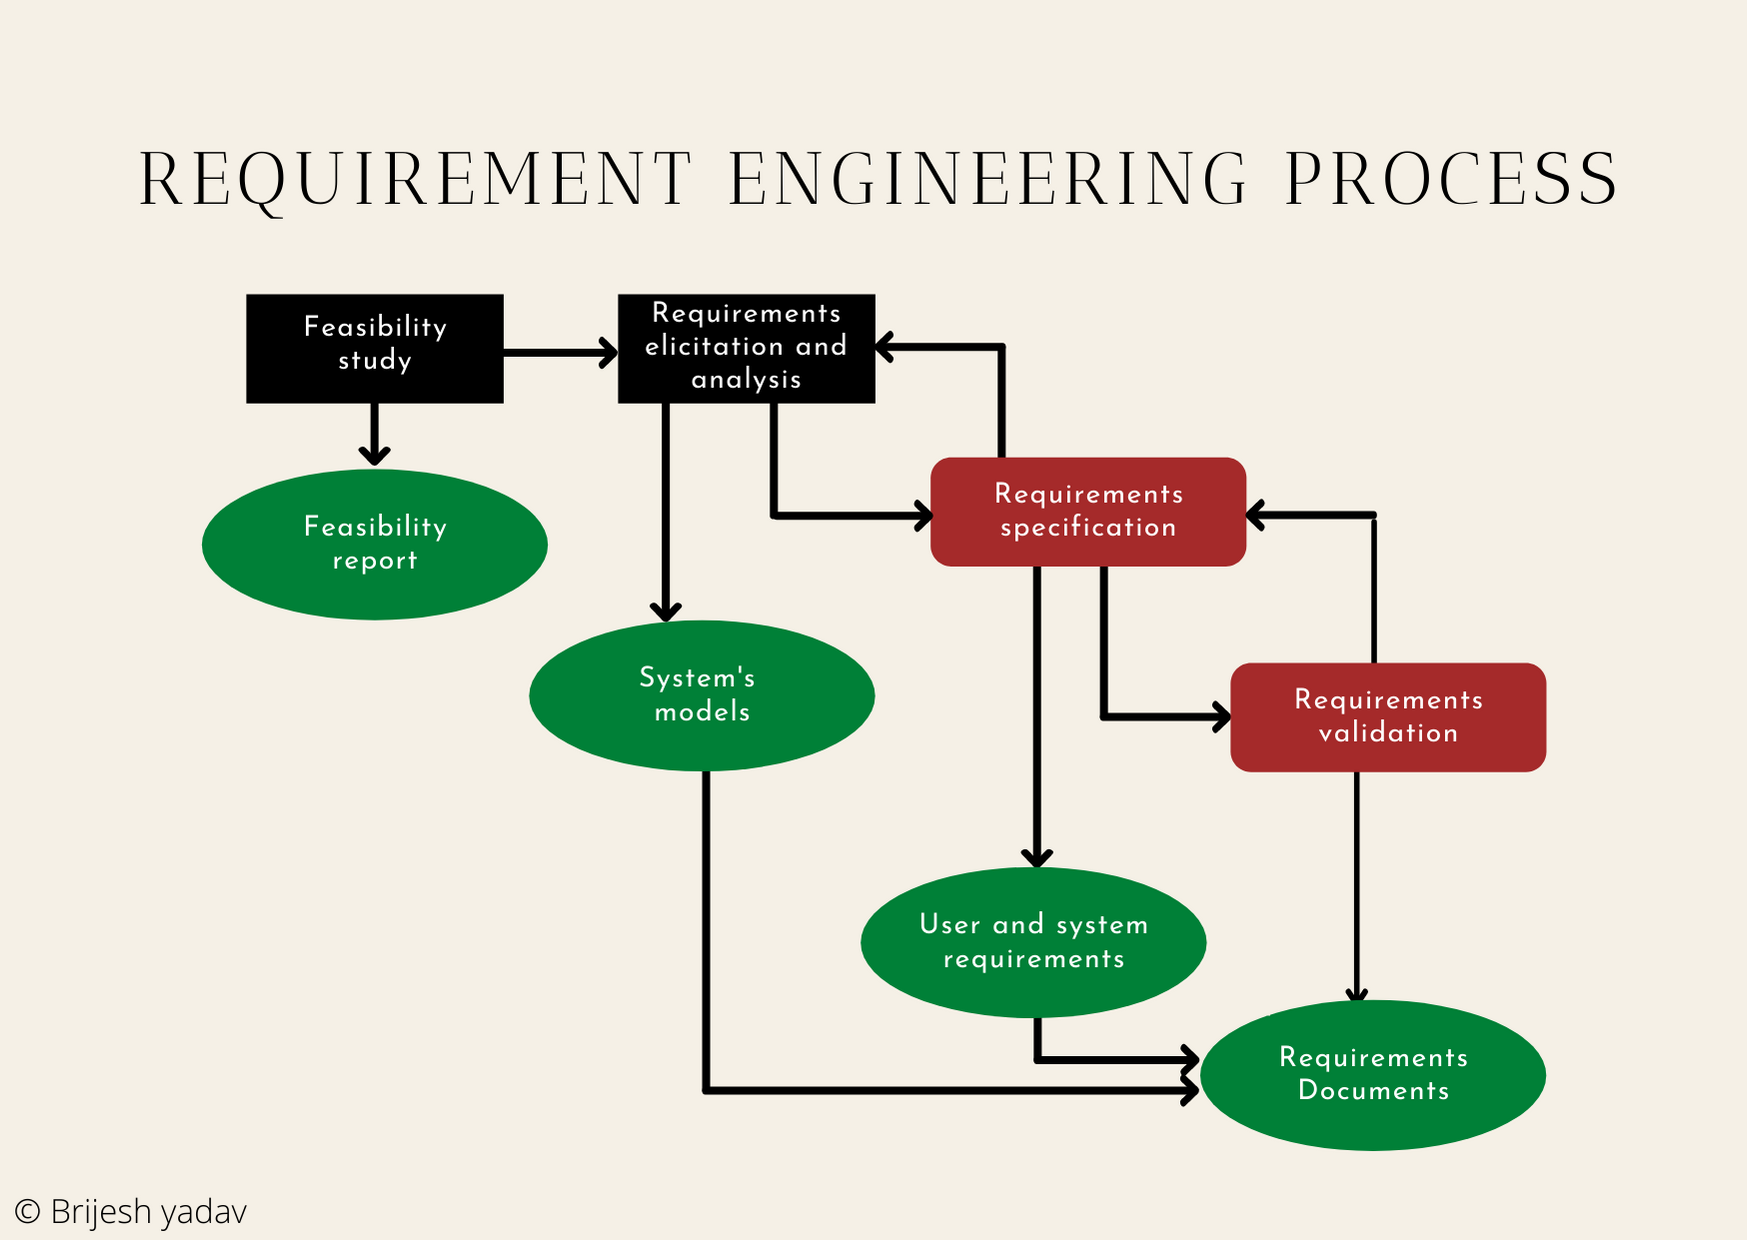 Requirement Engineering Process and its uses - MechoMotive